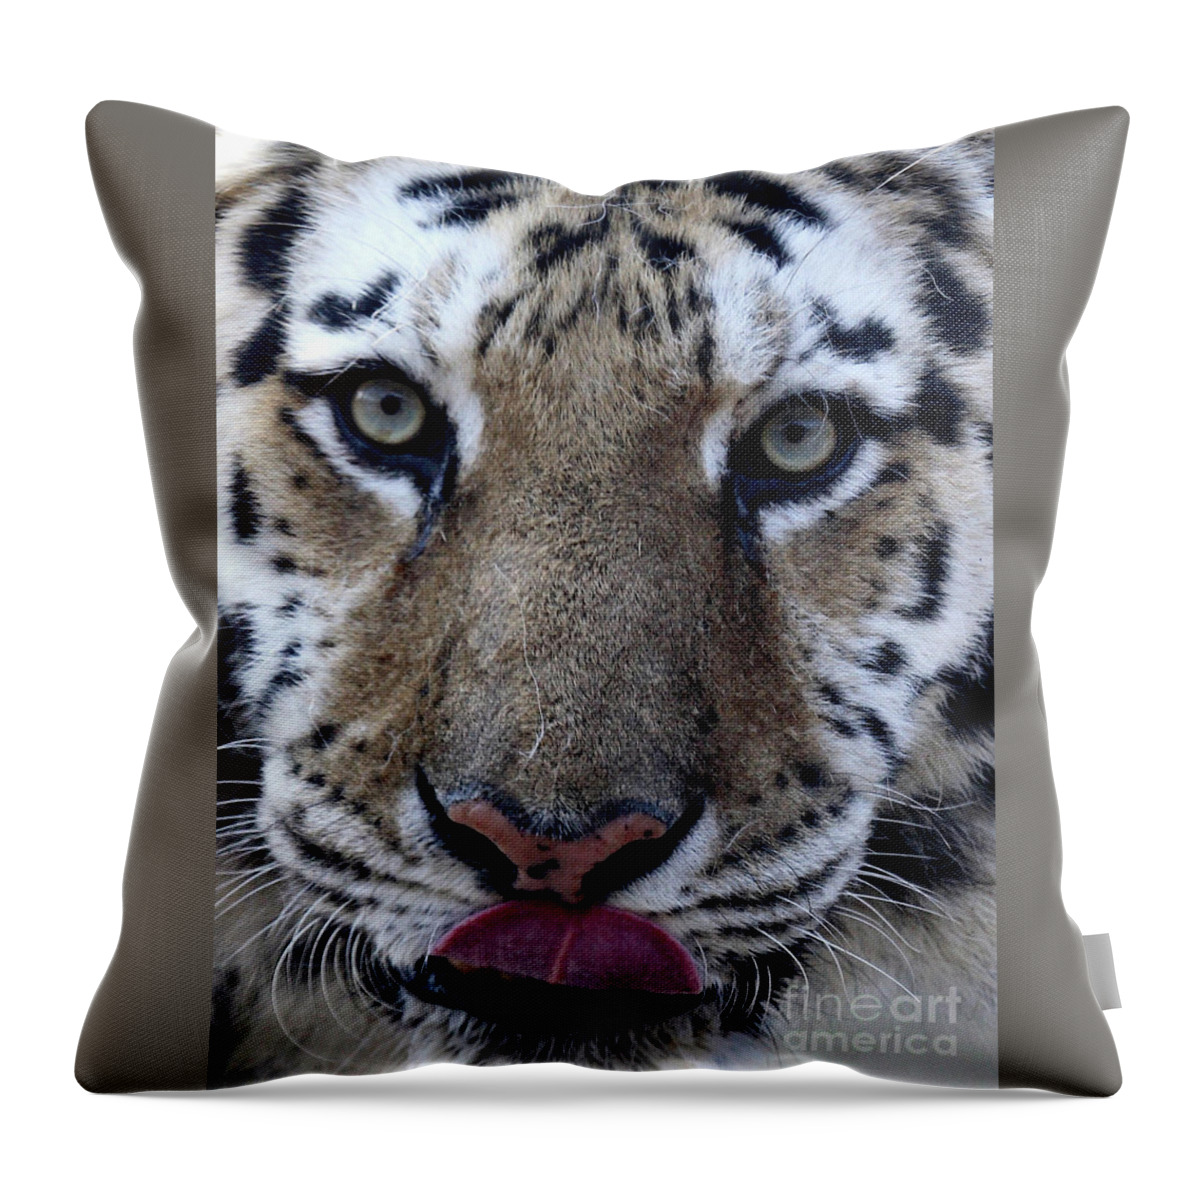 Cat Throw Pillow featuring the photograph Tiger Lick by Karol Livote